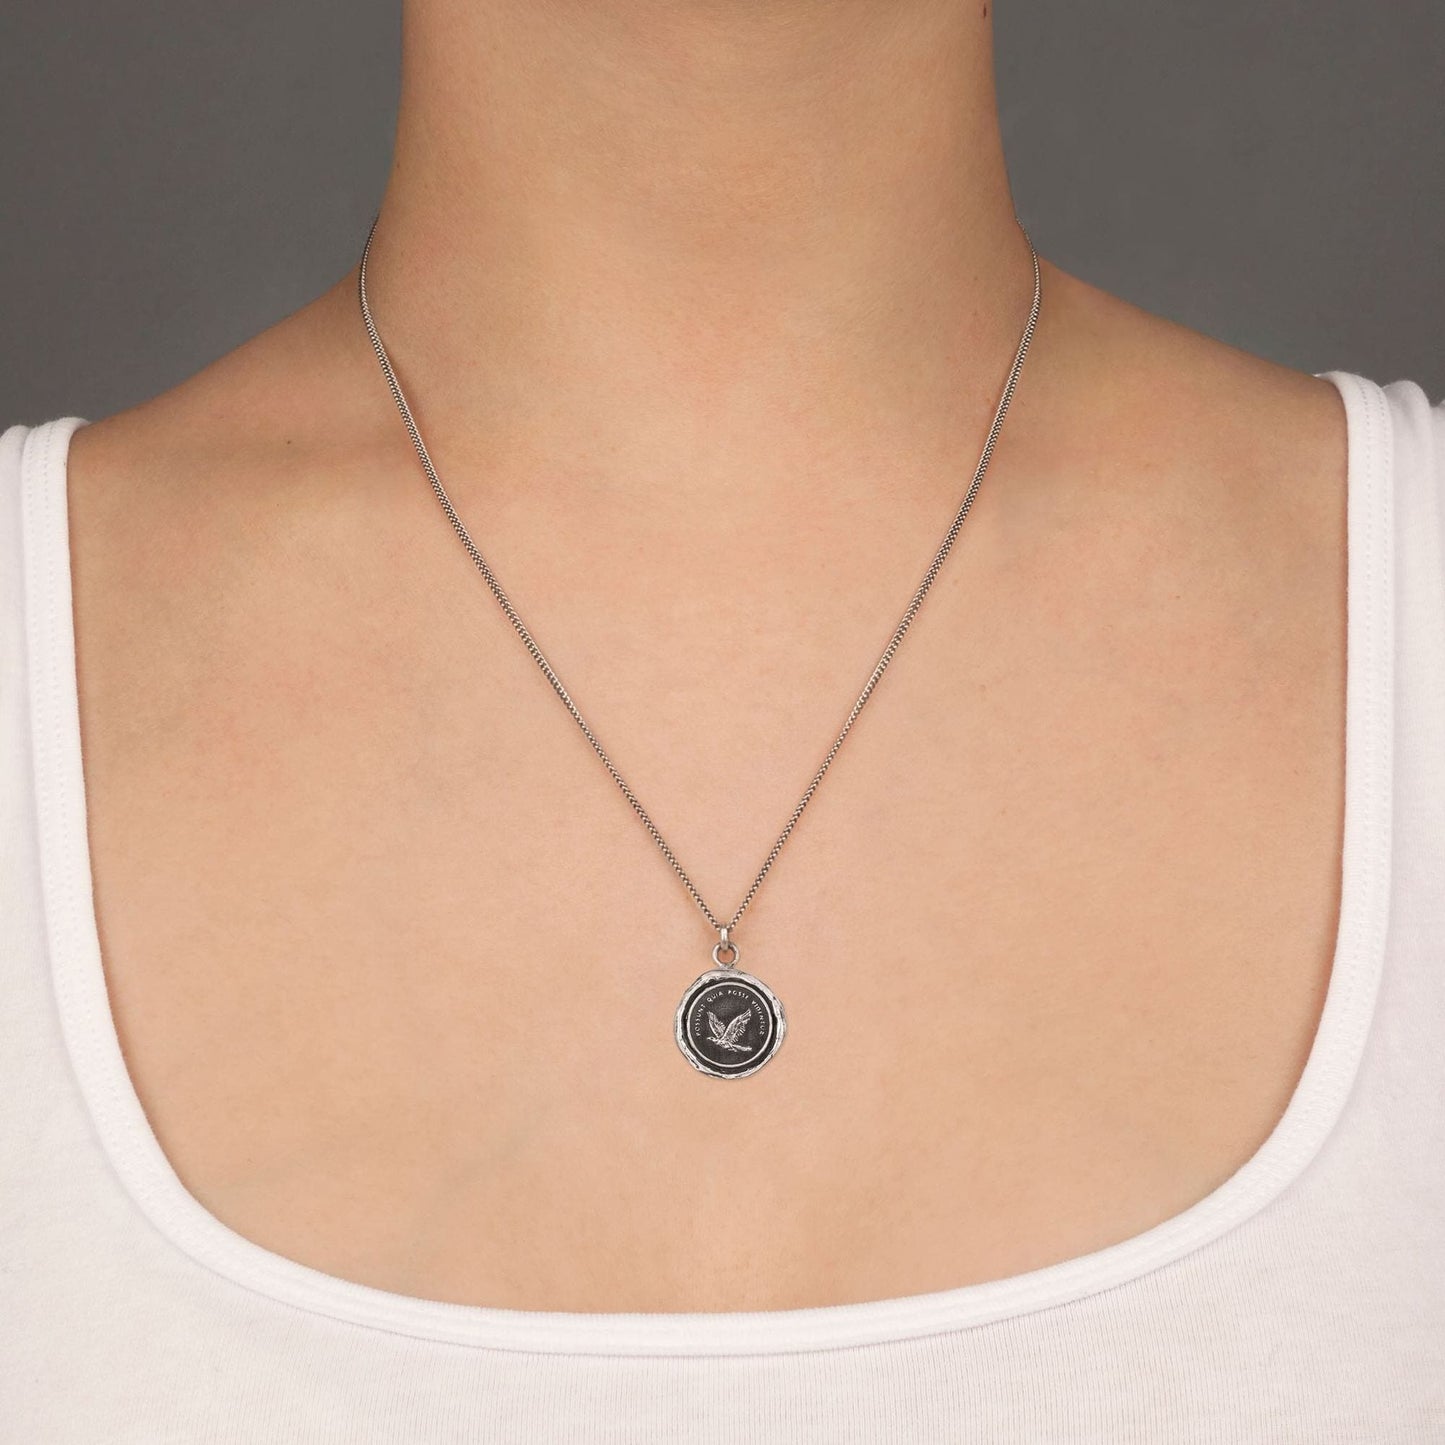 NKL Believe You Can Talisman Necklace